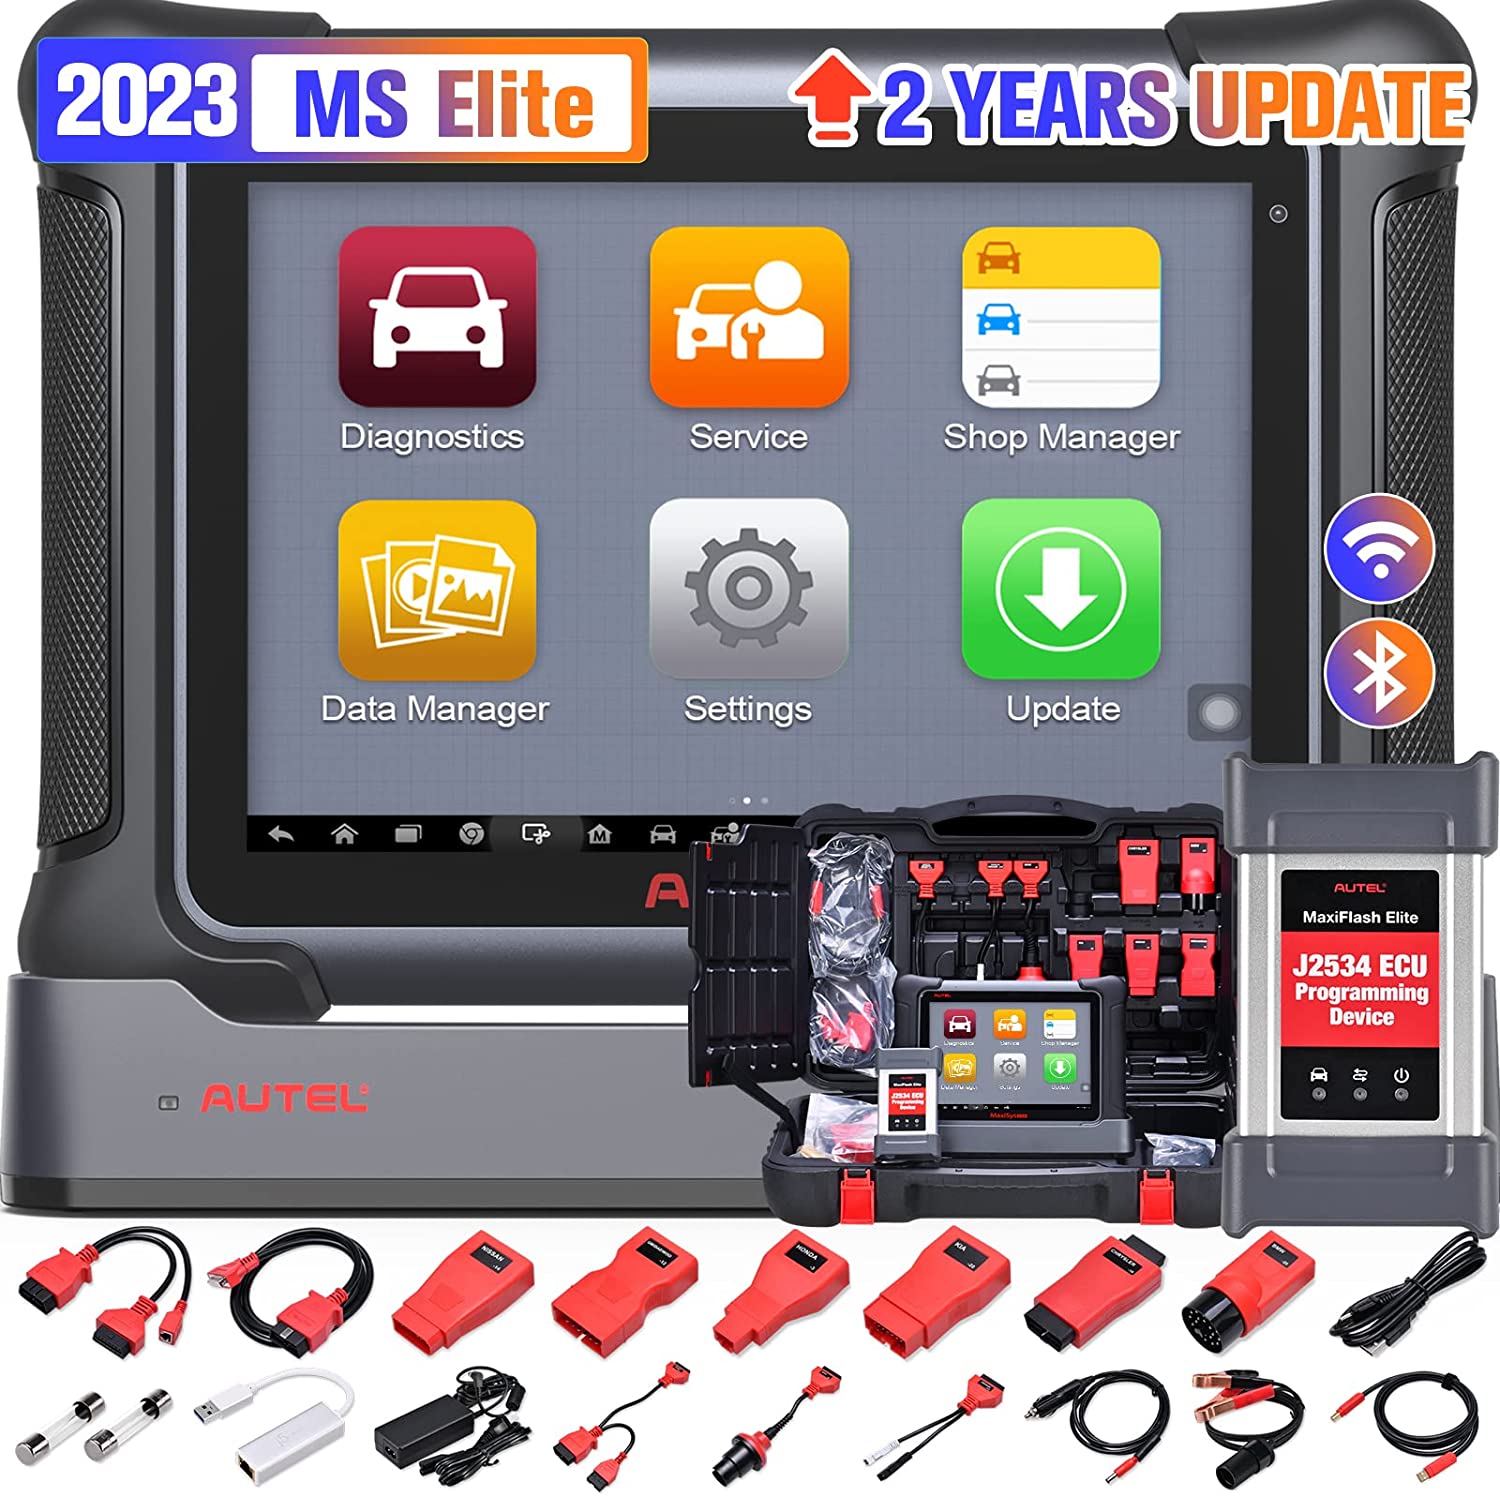 Autel MaxiSys Elite with 2 Years Free Update, 2023 Top J2534 ECU Programming